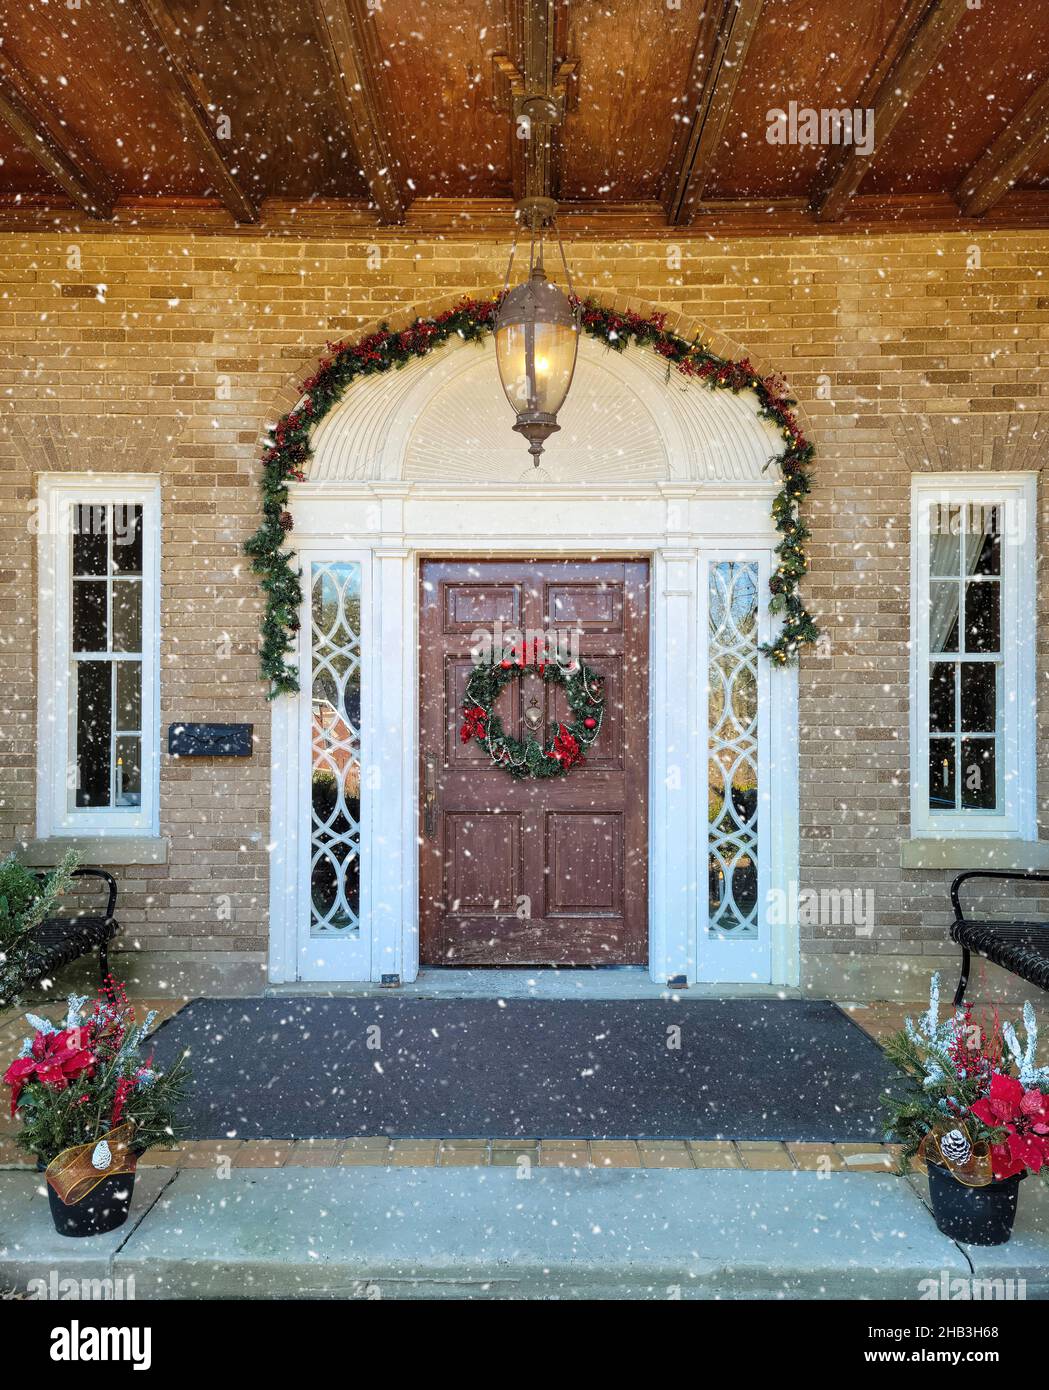 Wooden front door with Christmas wreath and garland decorations in snowflakes Stock Photo